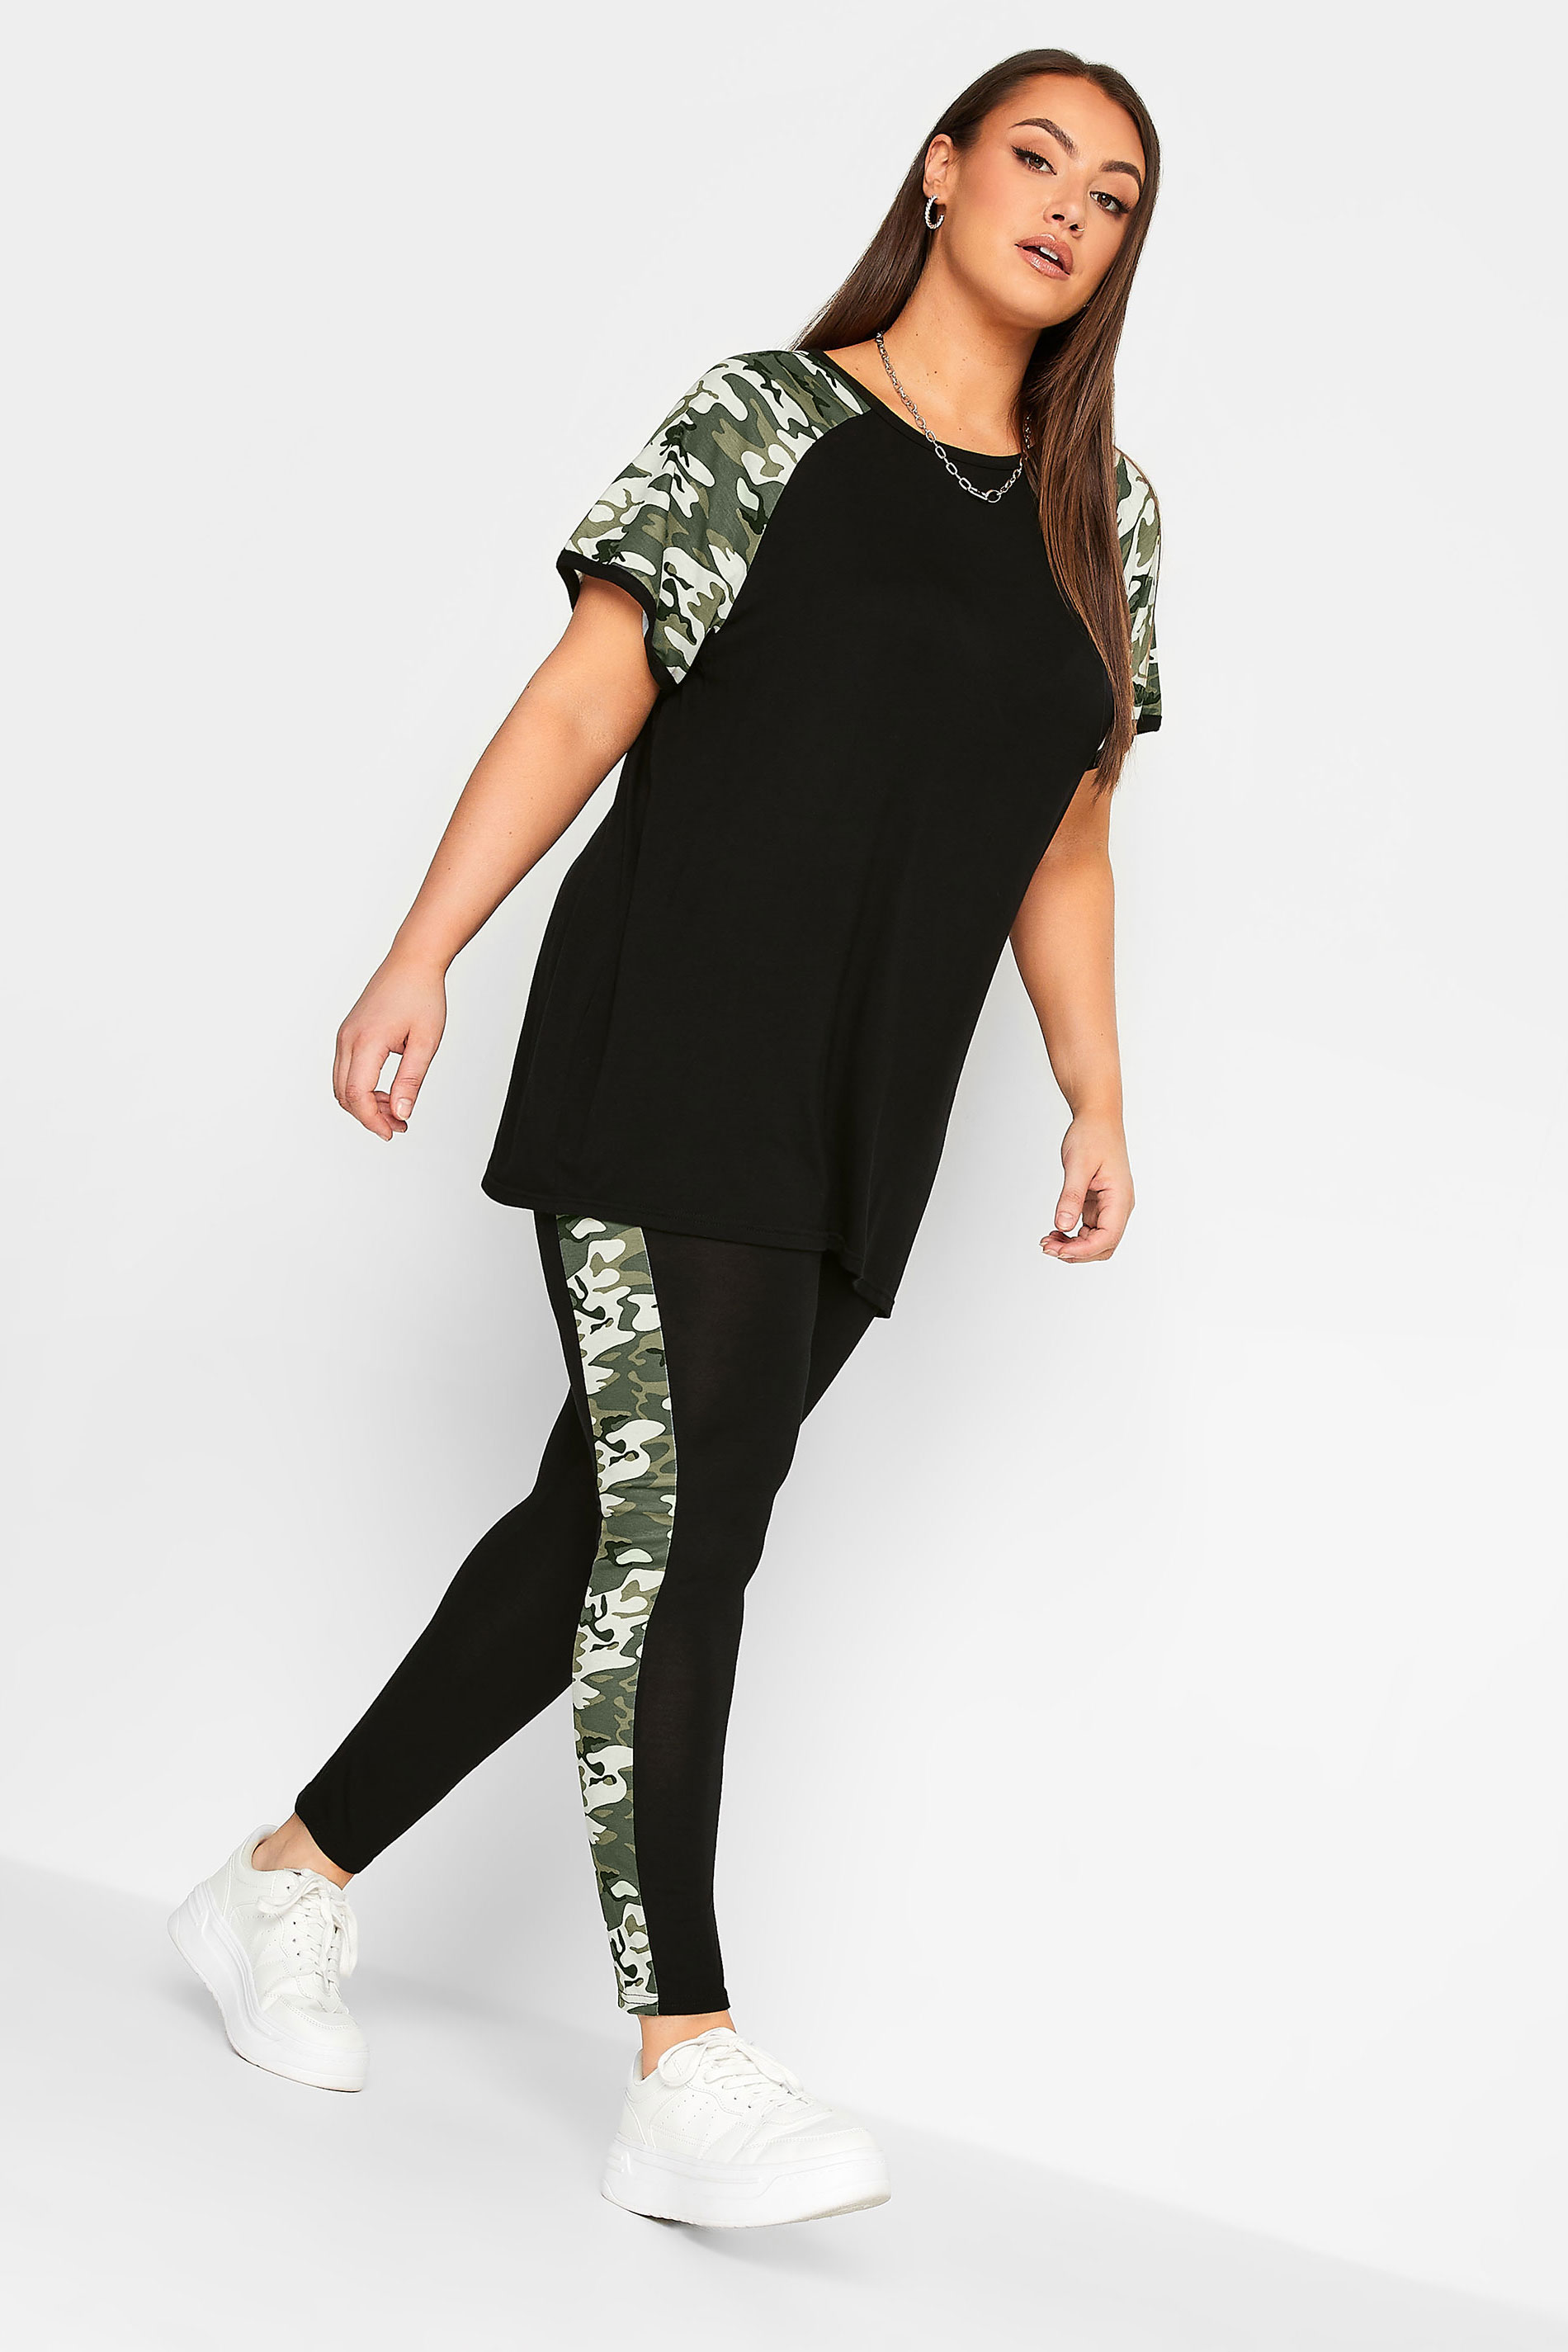 LIMITED COLLECTION Plus Size Black & Green Camo Side Panel Leggings 3